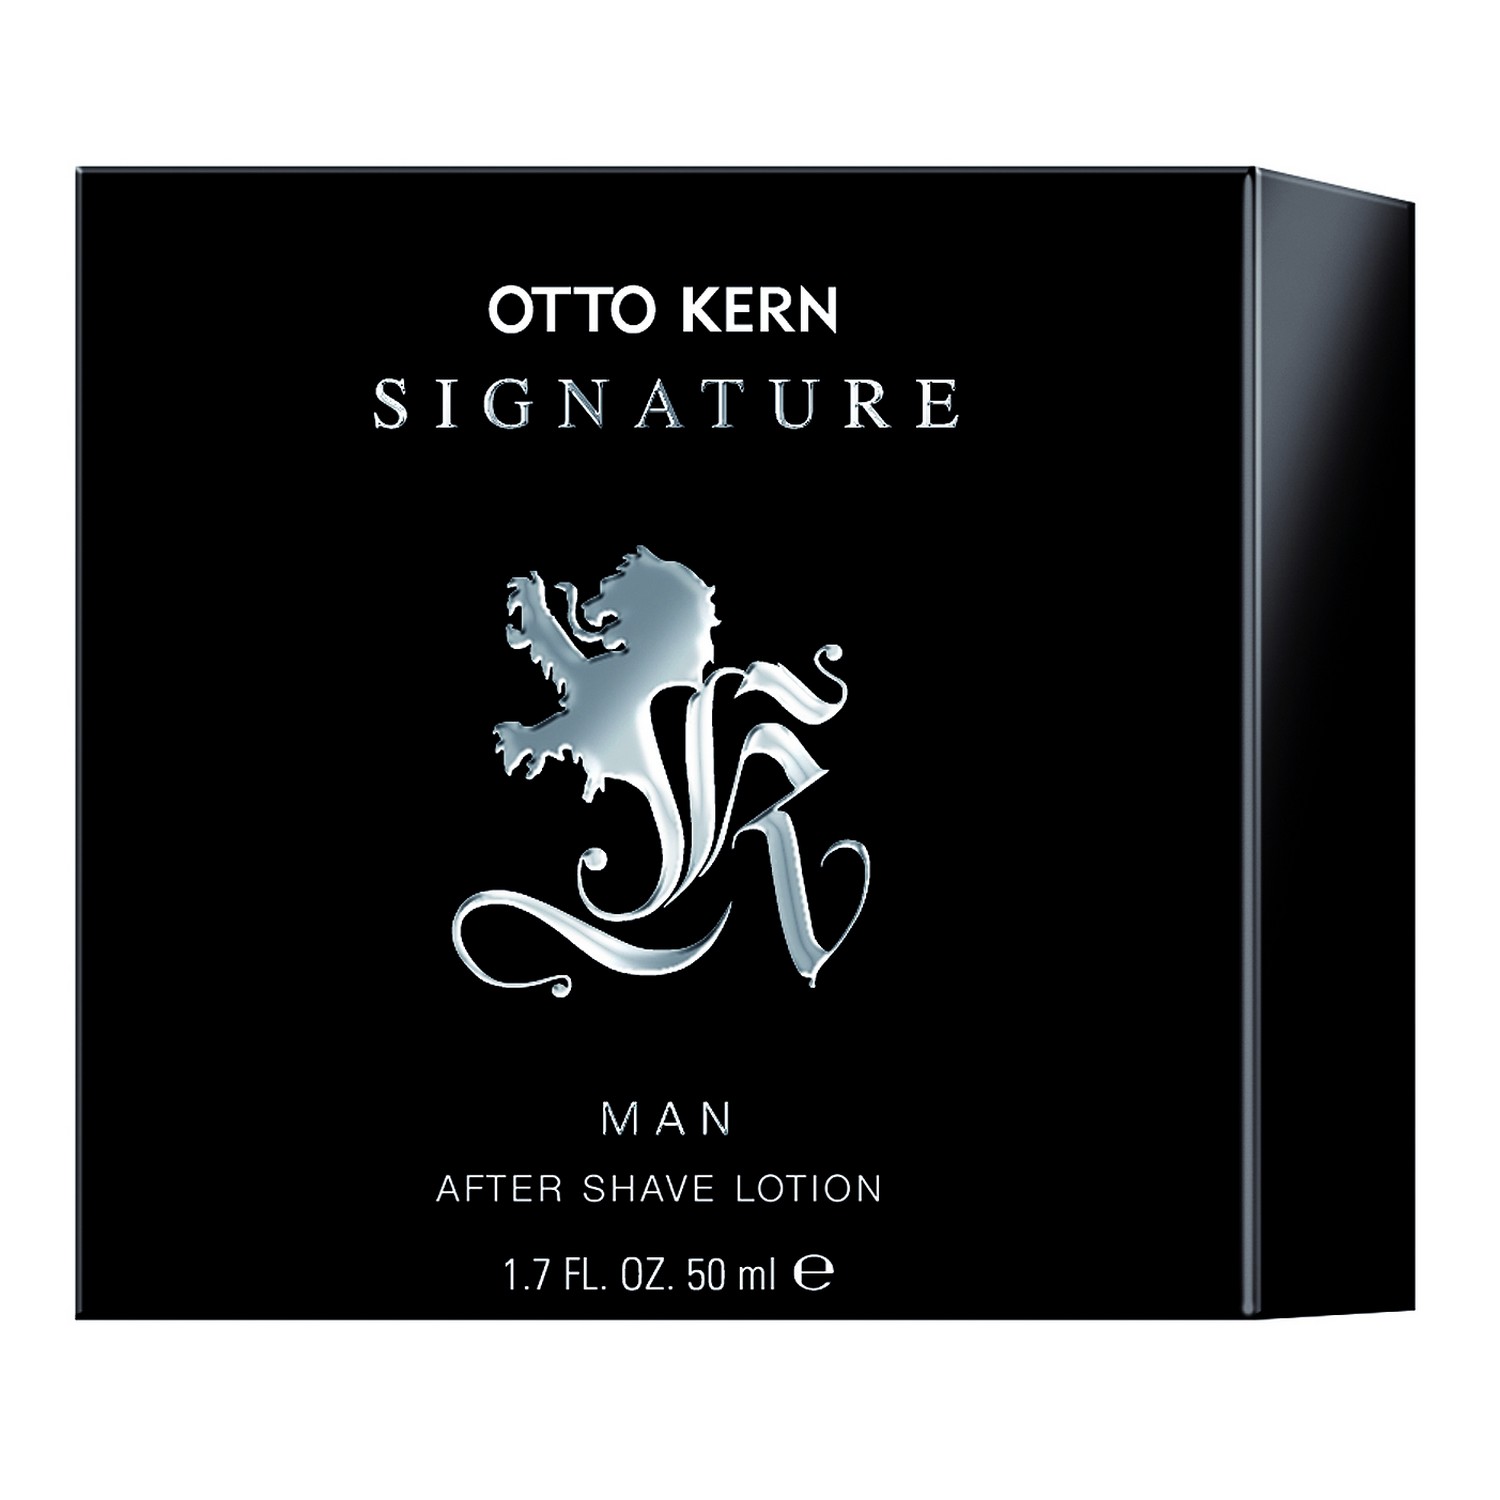 Otto Kern Signature Man After Shave Lotion 50ml